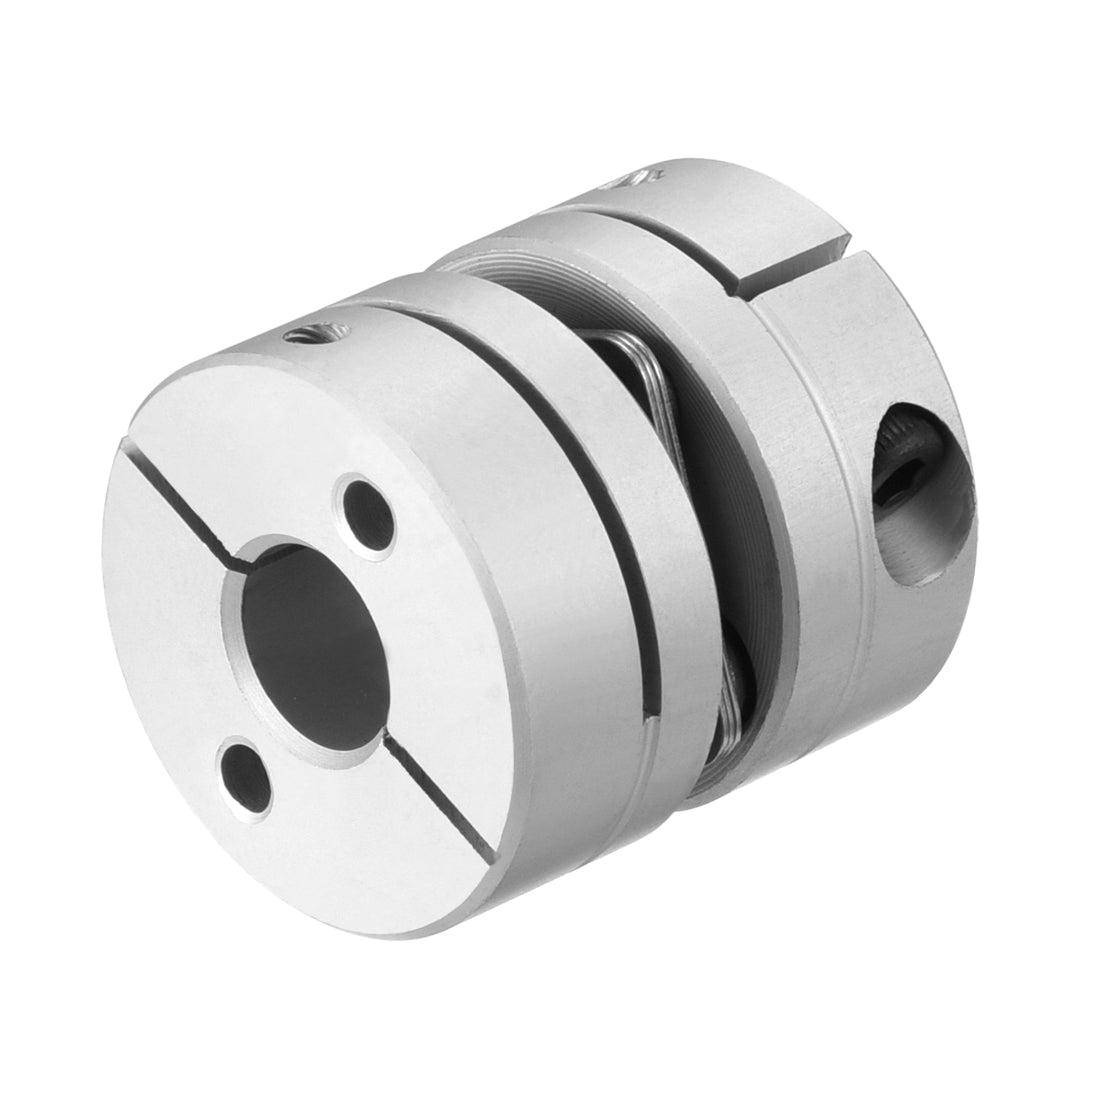 uxcell Uxcell 6mm to 8mm Bore L26xD26 1 Diaphragm Motor Wheel Flexible Coupling Joint